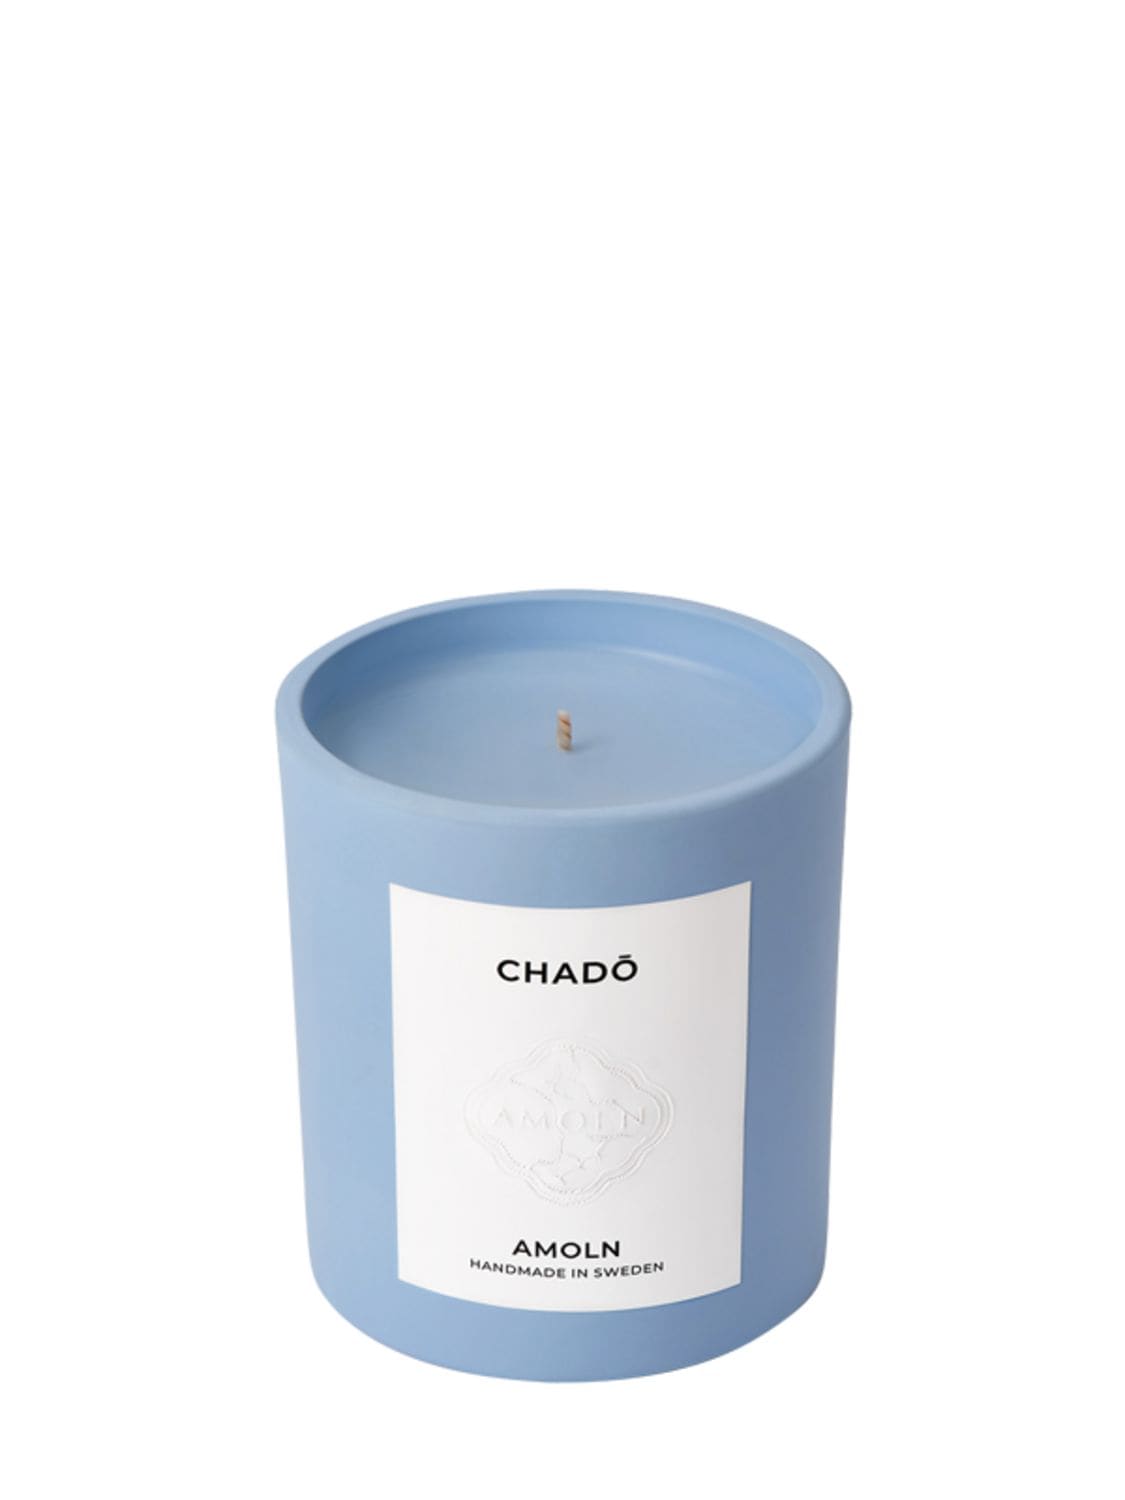 Amoln Chado Scented Candle In Blue